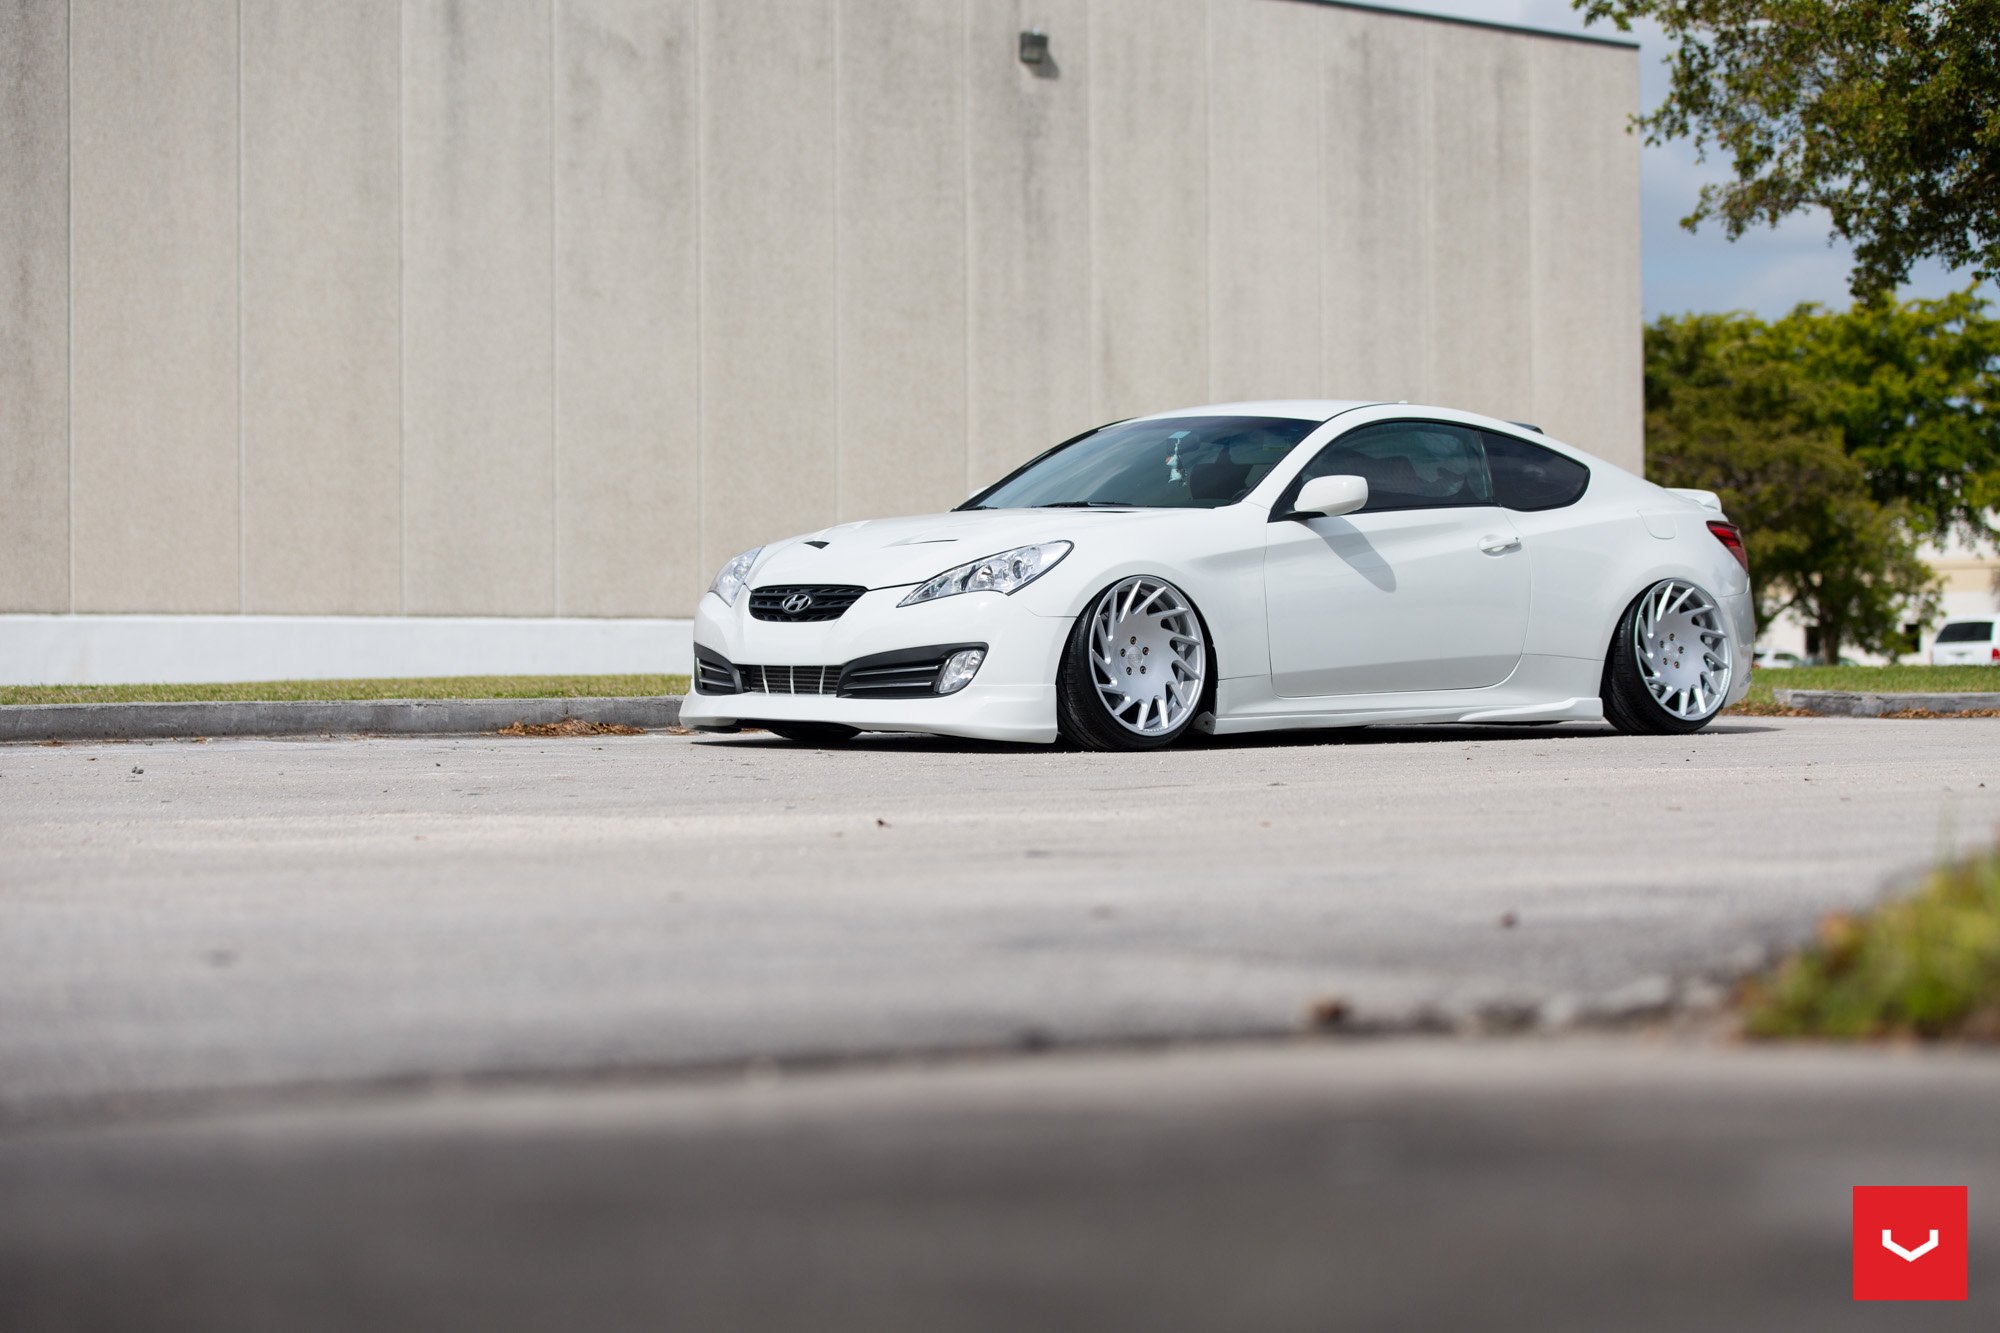 Aftermarket LED Headlights on White Hyundai Genesis Coupe - Photo by Vossen